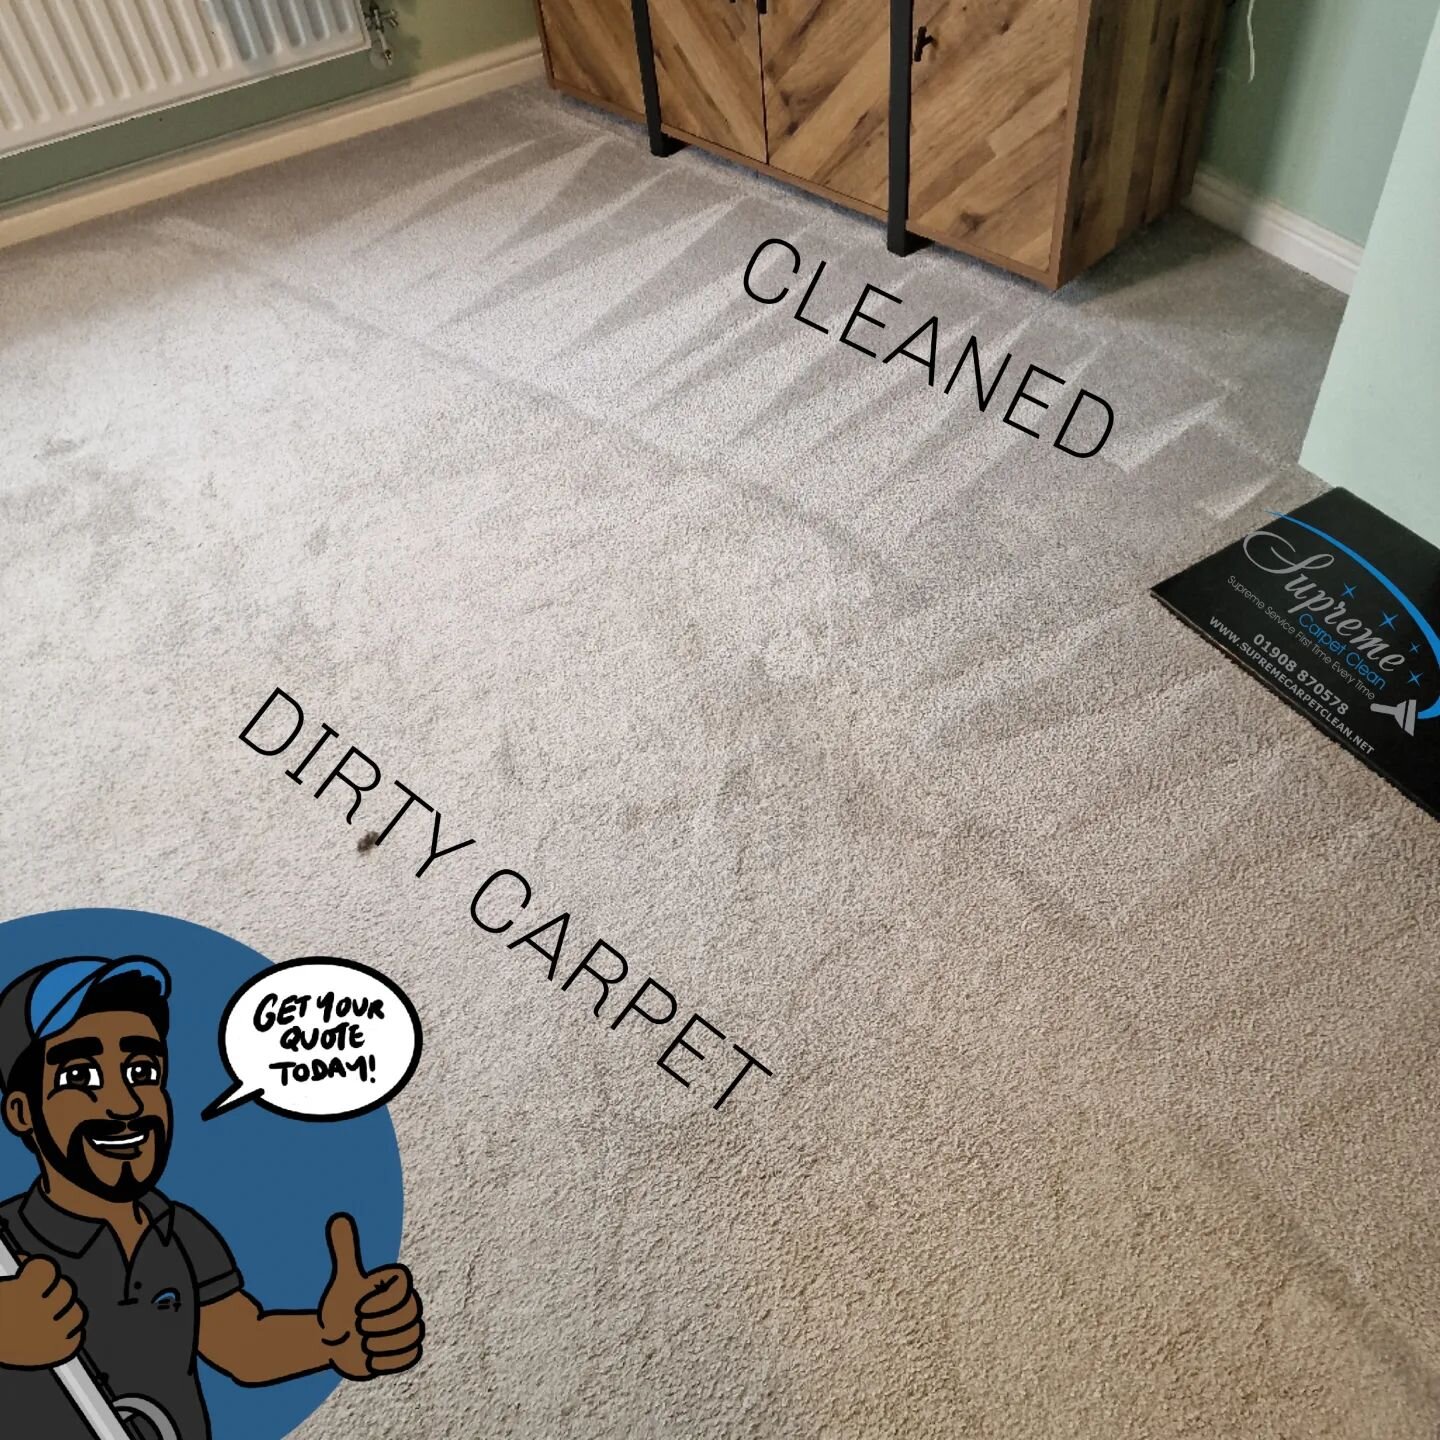 Keep your carpet looking at its best with regular professional carpet cleans. Don't wait until it looks dirty.

FREE QUOTES AVAILABLE - WE COVER NATIONWIDE